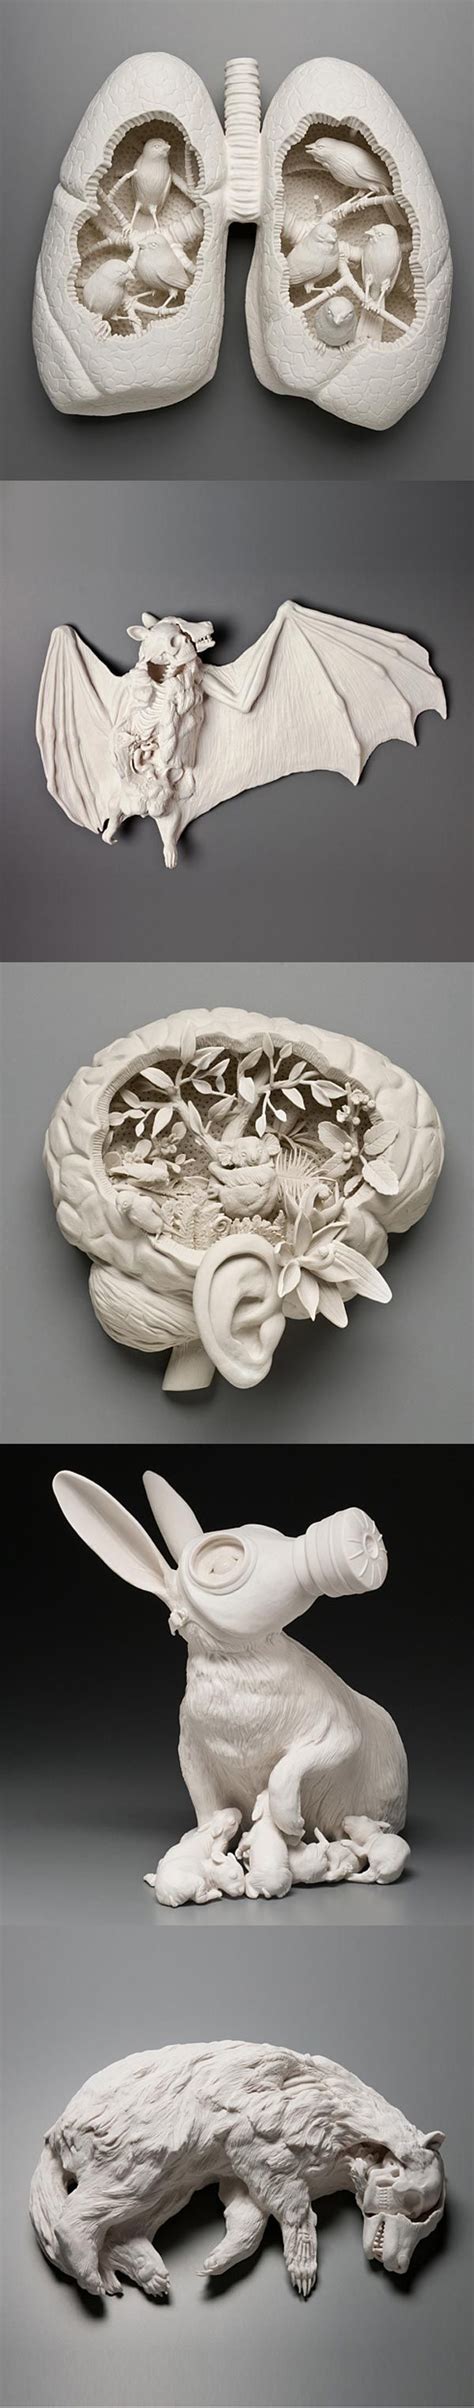 Porcelain Sculptures By Kate MacDowell Porcelain Sculptures By Kate